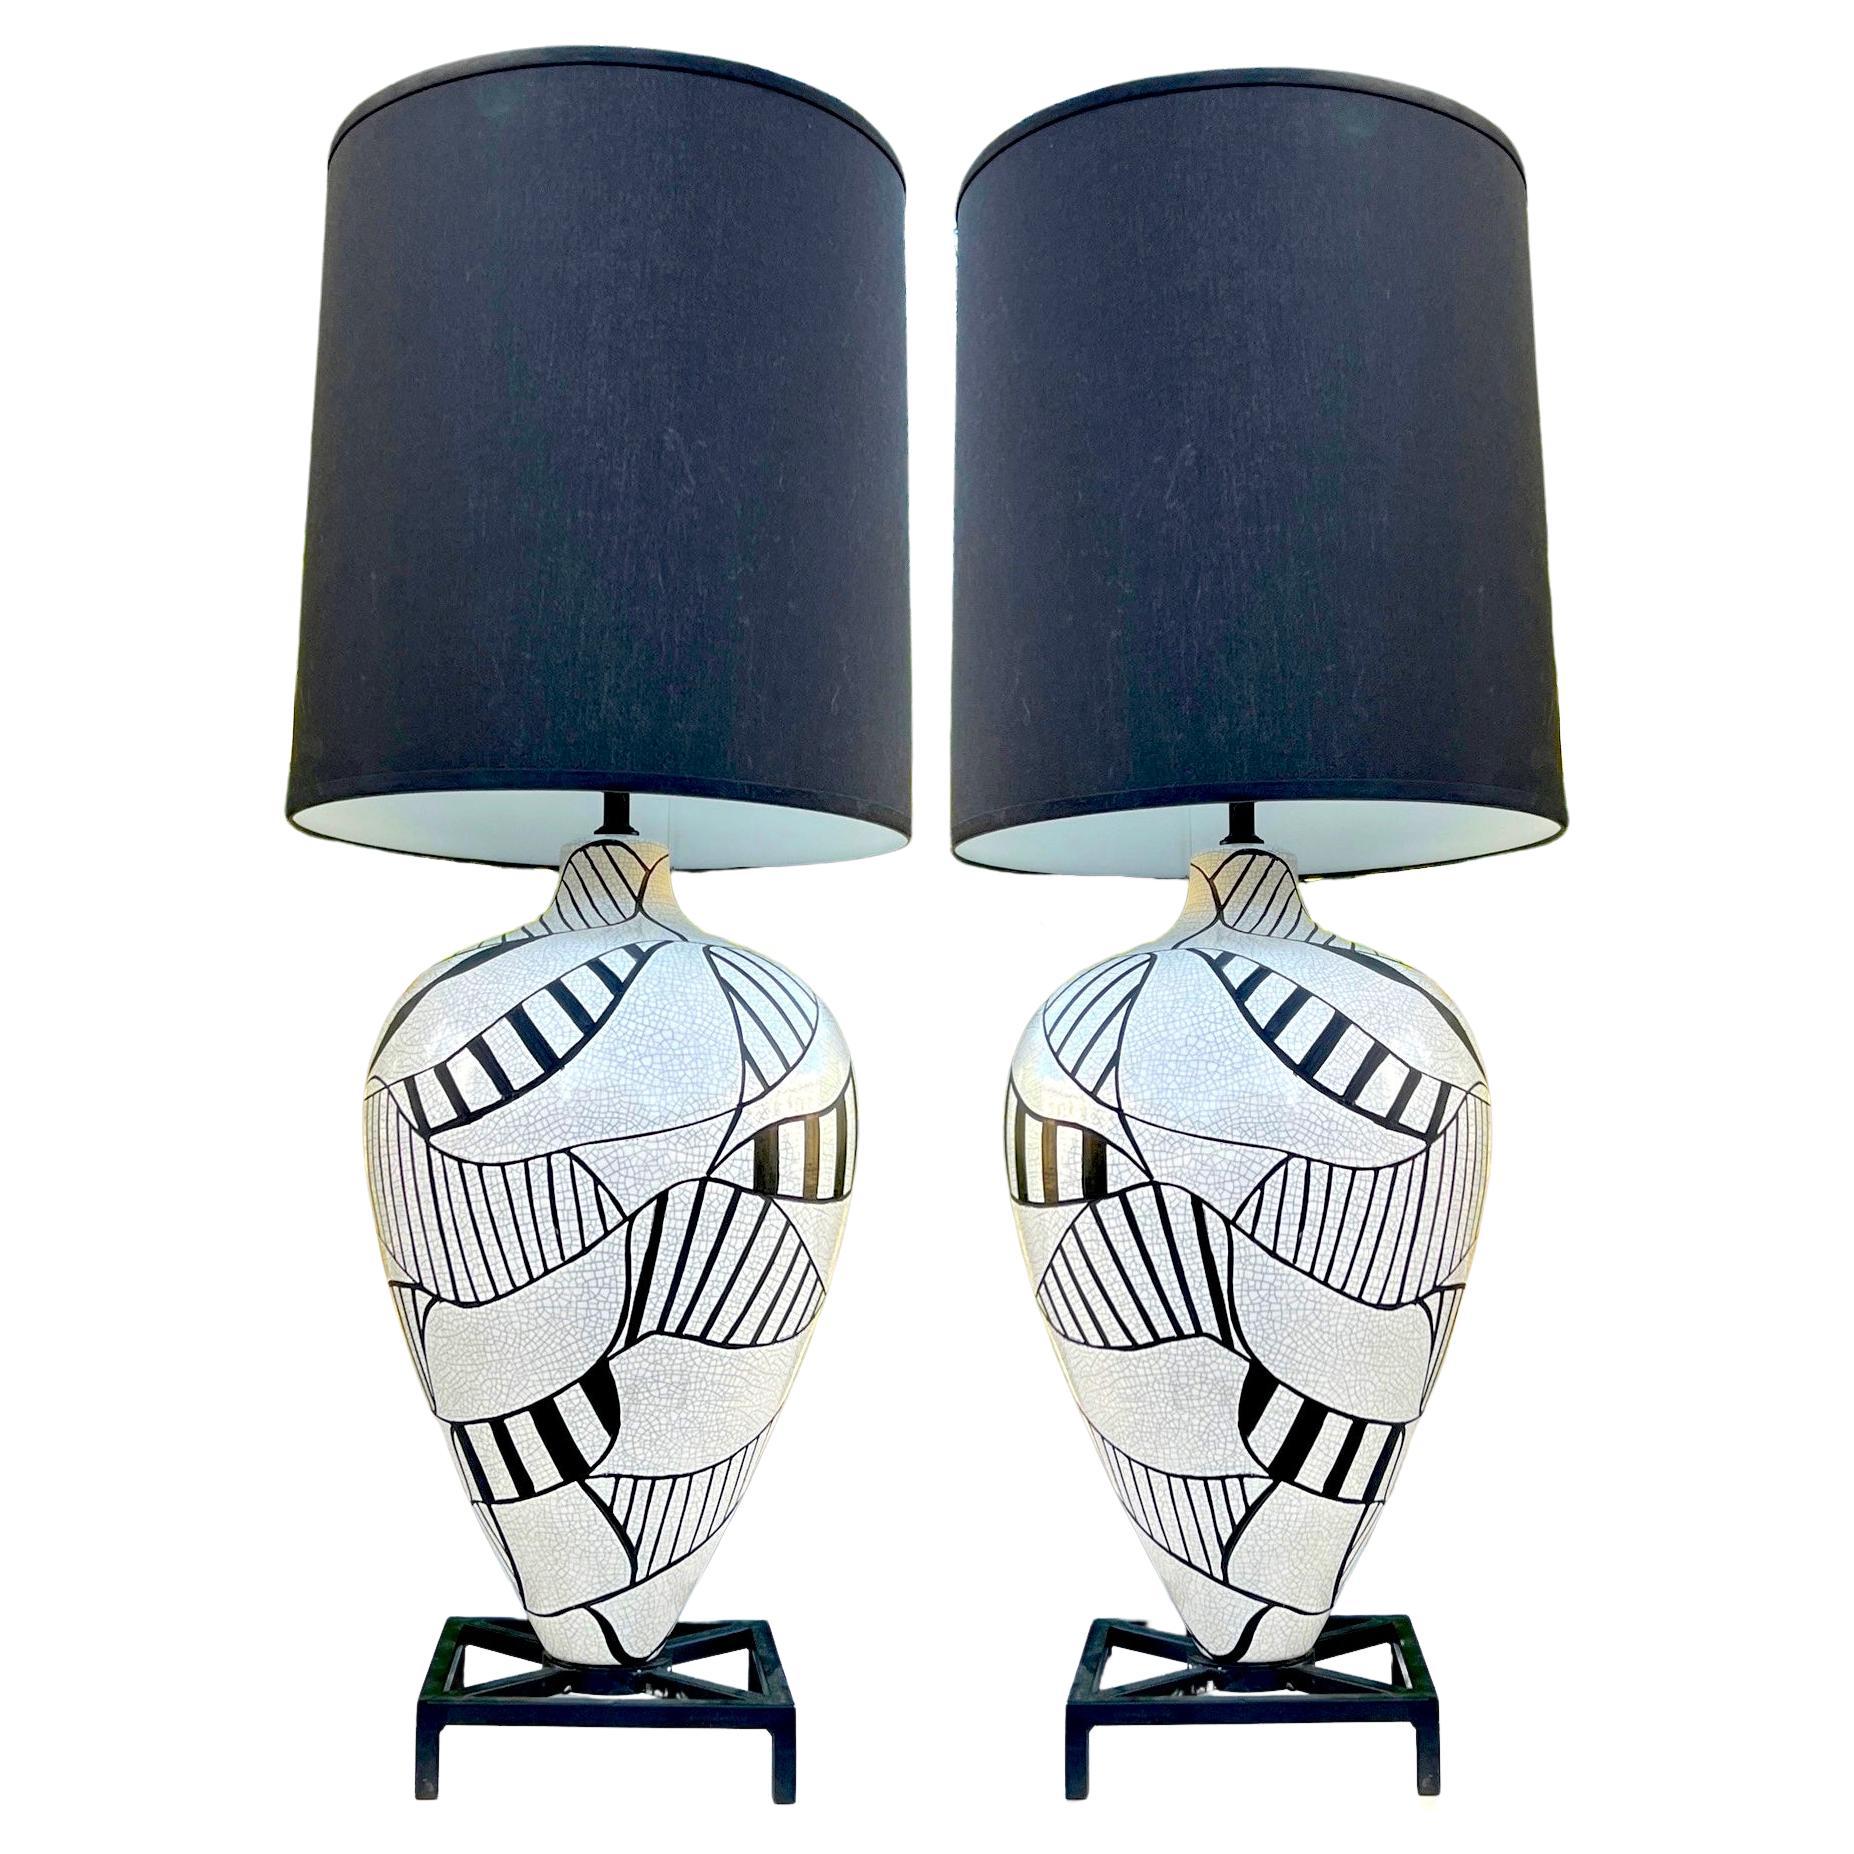 Pair of Black & White Geometric Pottery Lamps in the Style Roger Capron, 1980's